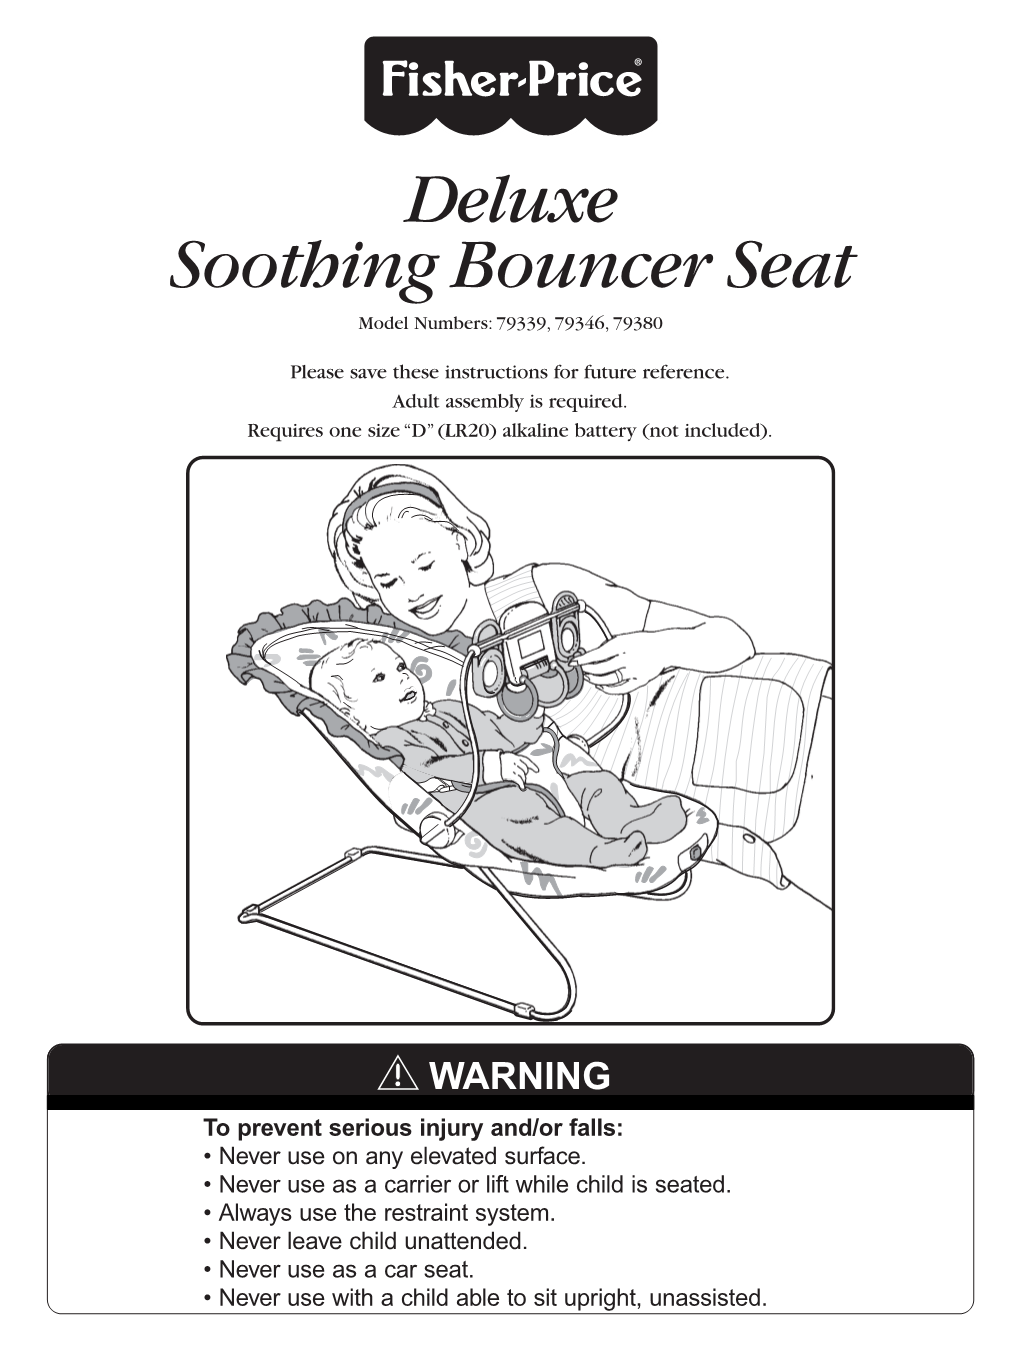 Deluxe Soothing Bouncer Seat Model Numbers: 79339, 79346, 79380